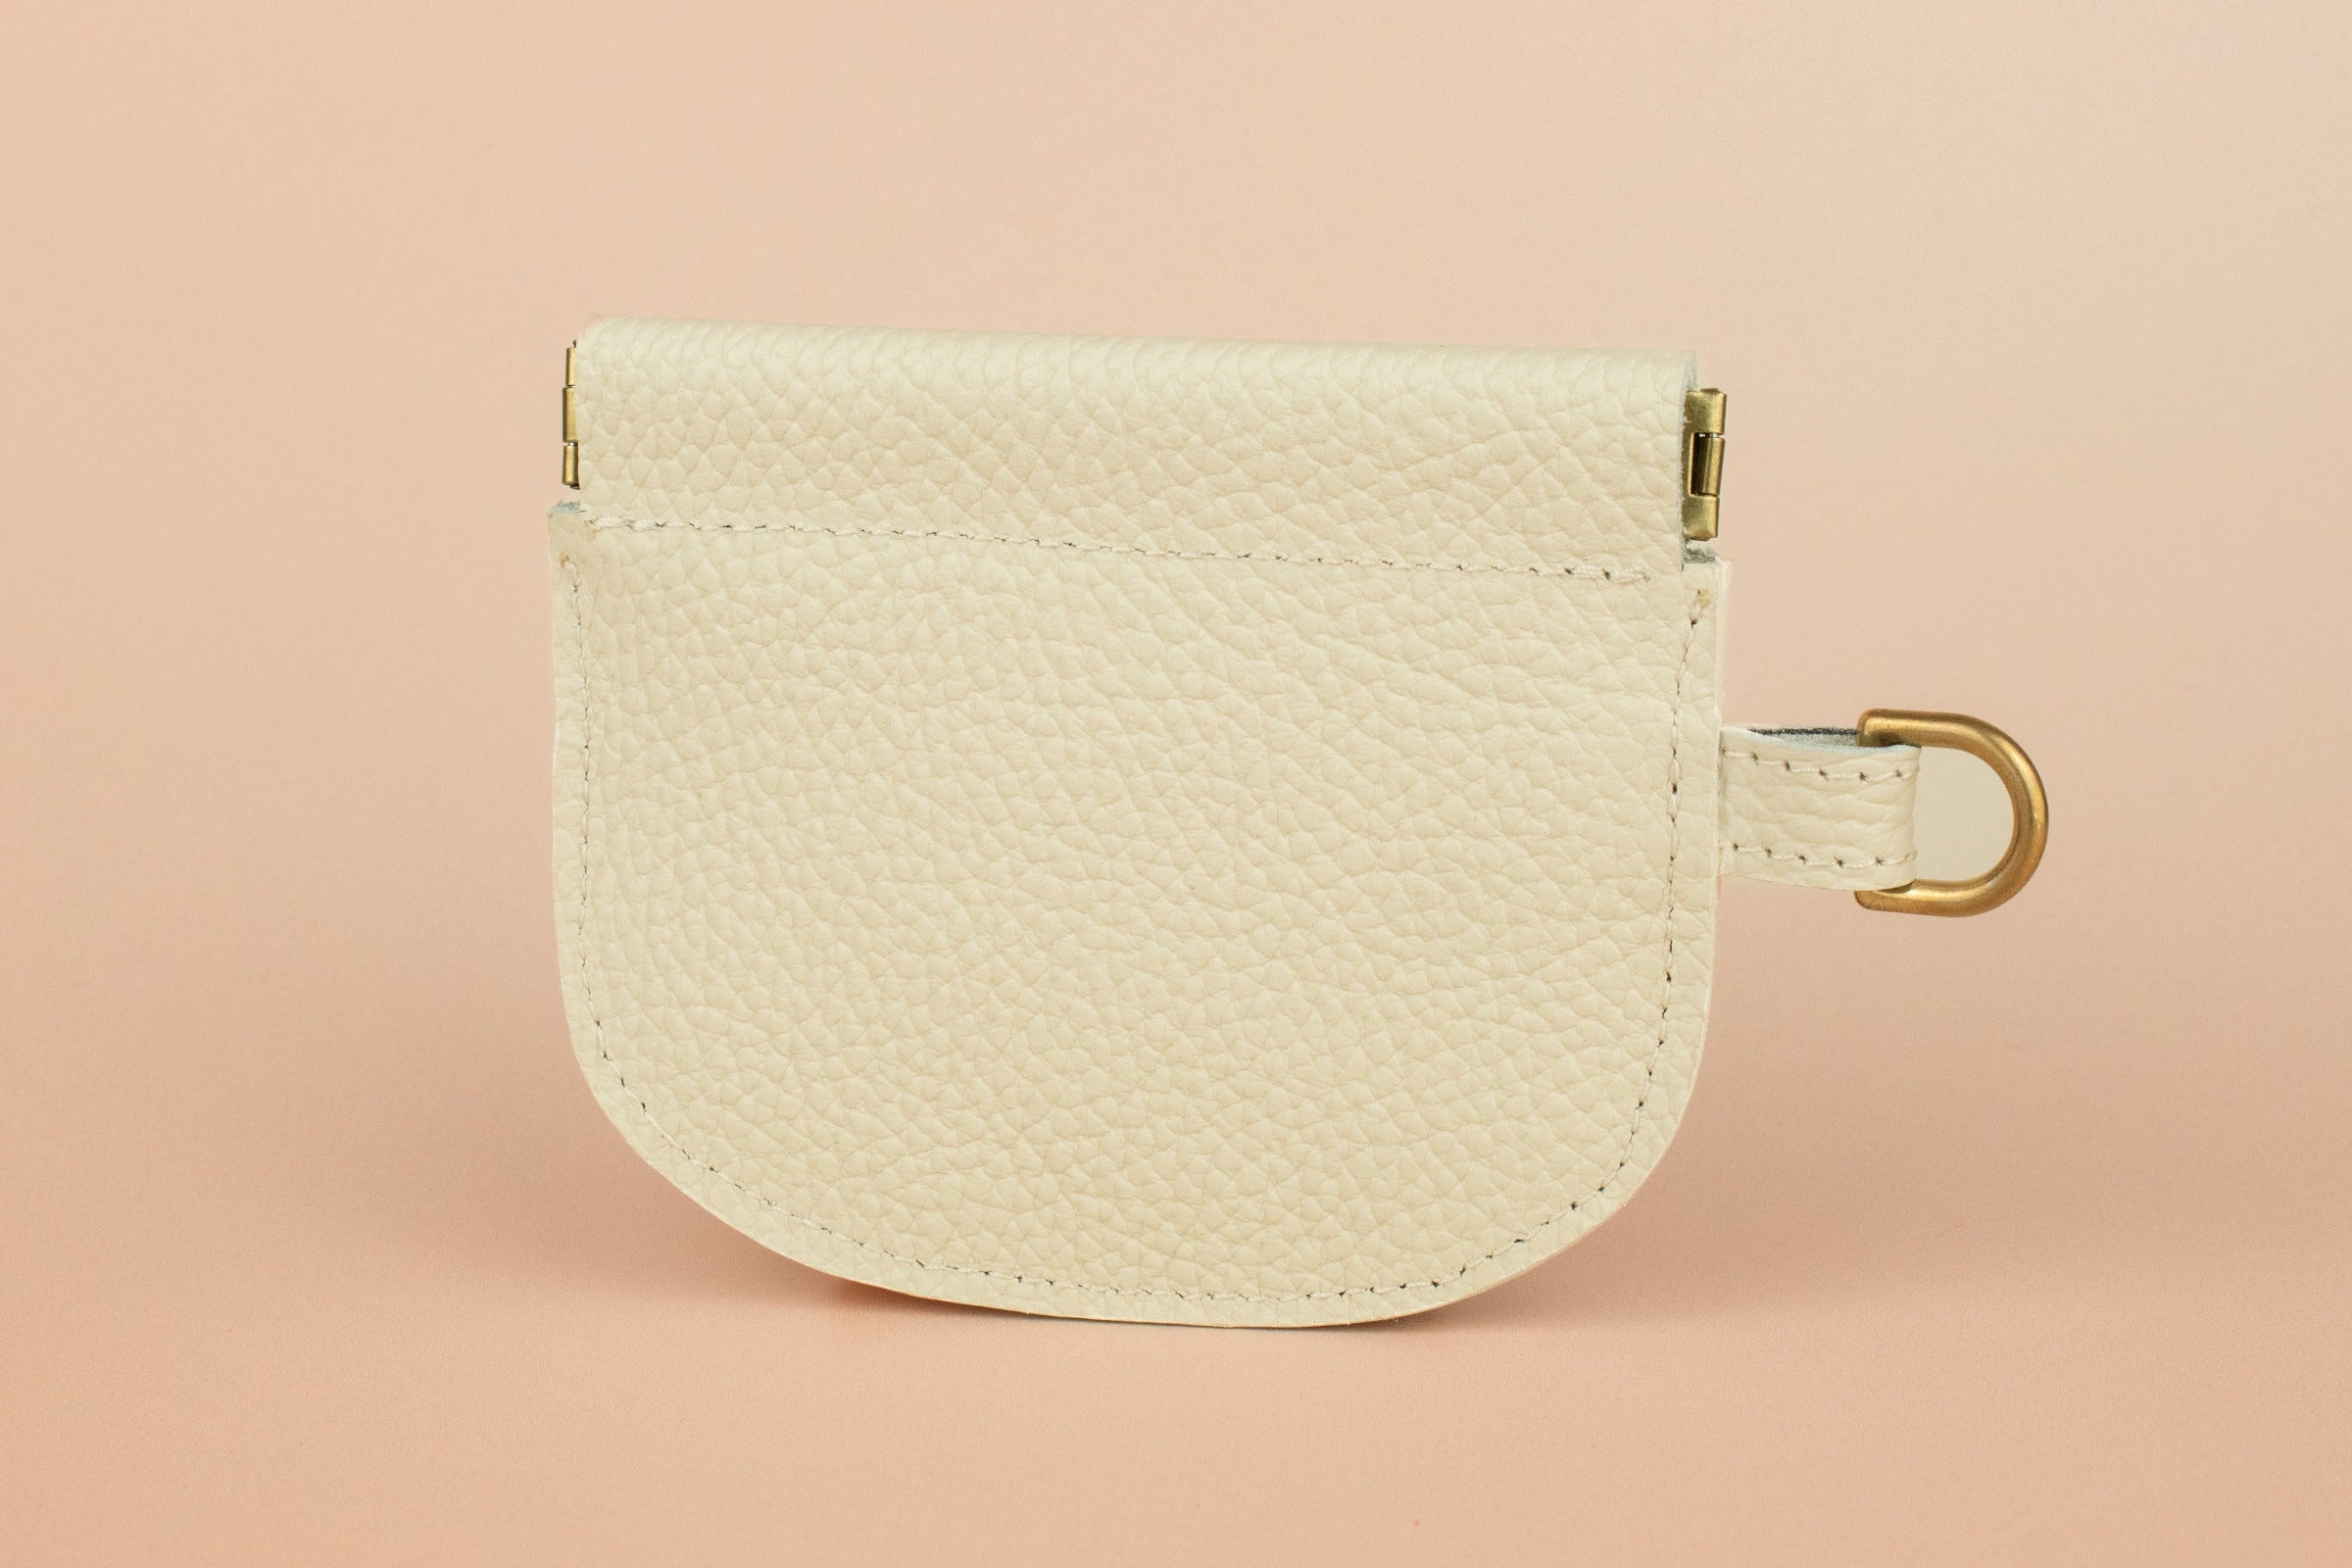 slim minimal meringue leather card case pouch or coin purse